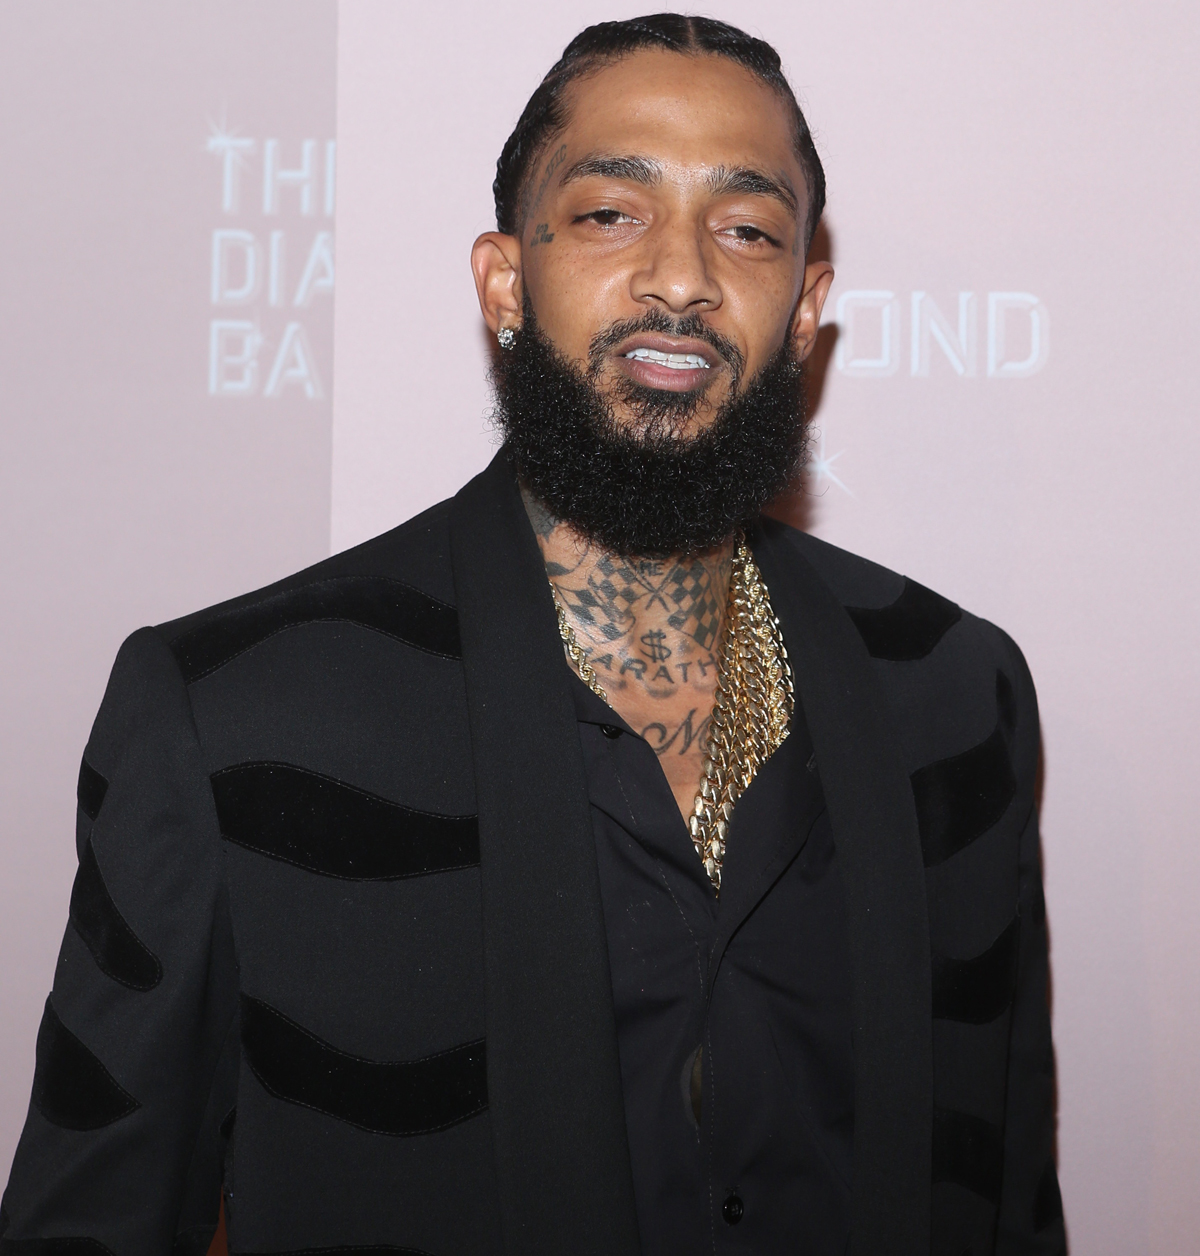 Nipsey Hussle's Life to Be Memorialized in Documentary Series 'Hussle